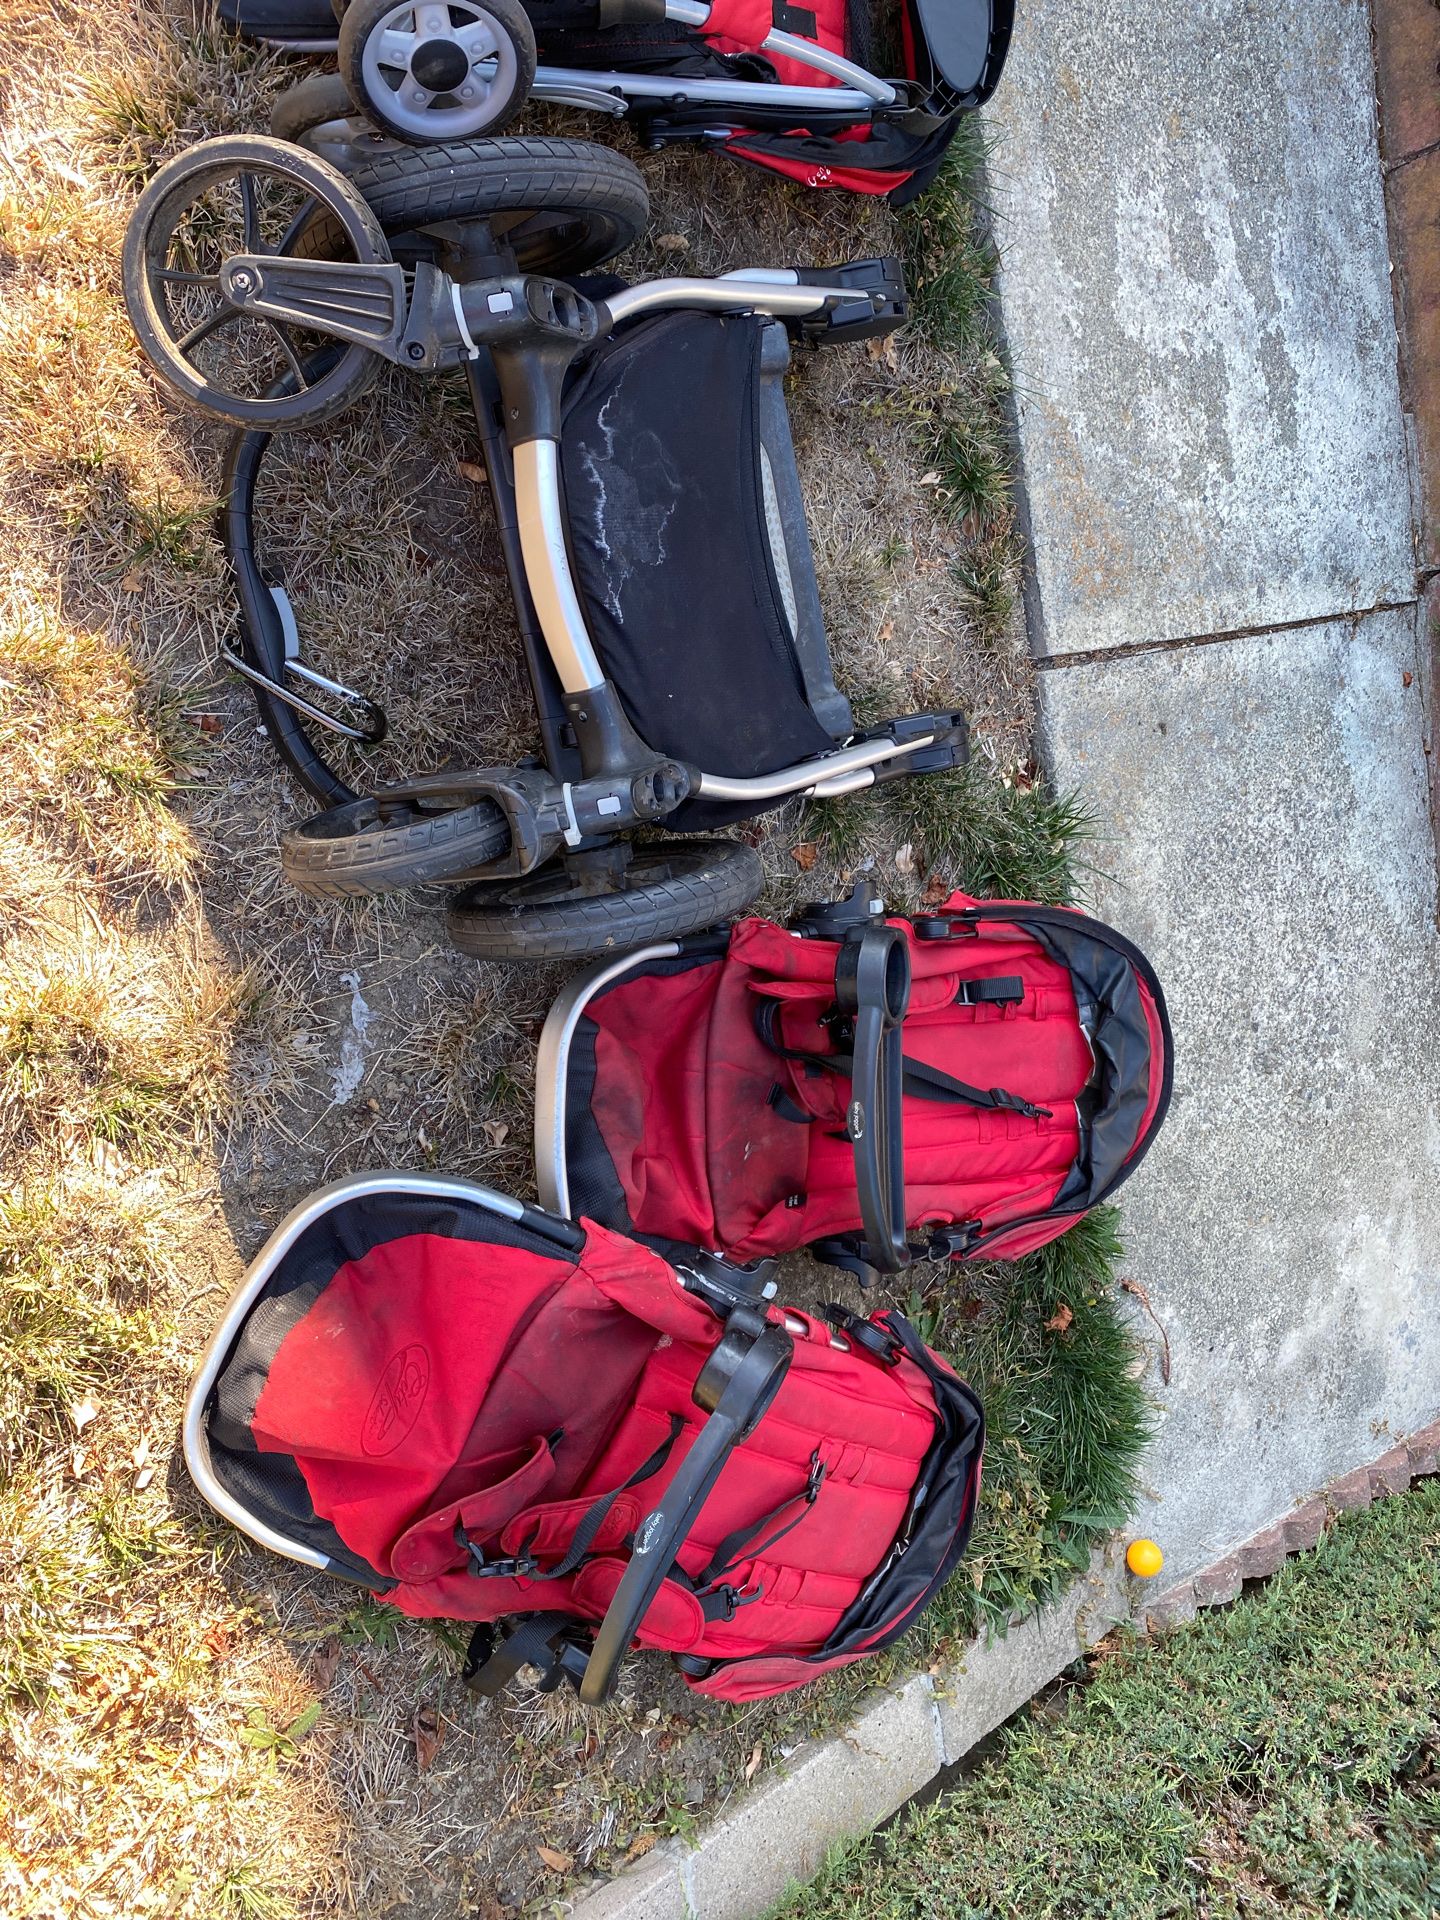 City Select Red Dual stroller w/ standing board